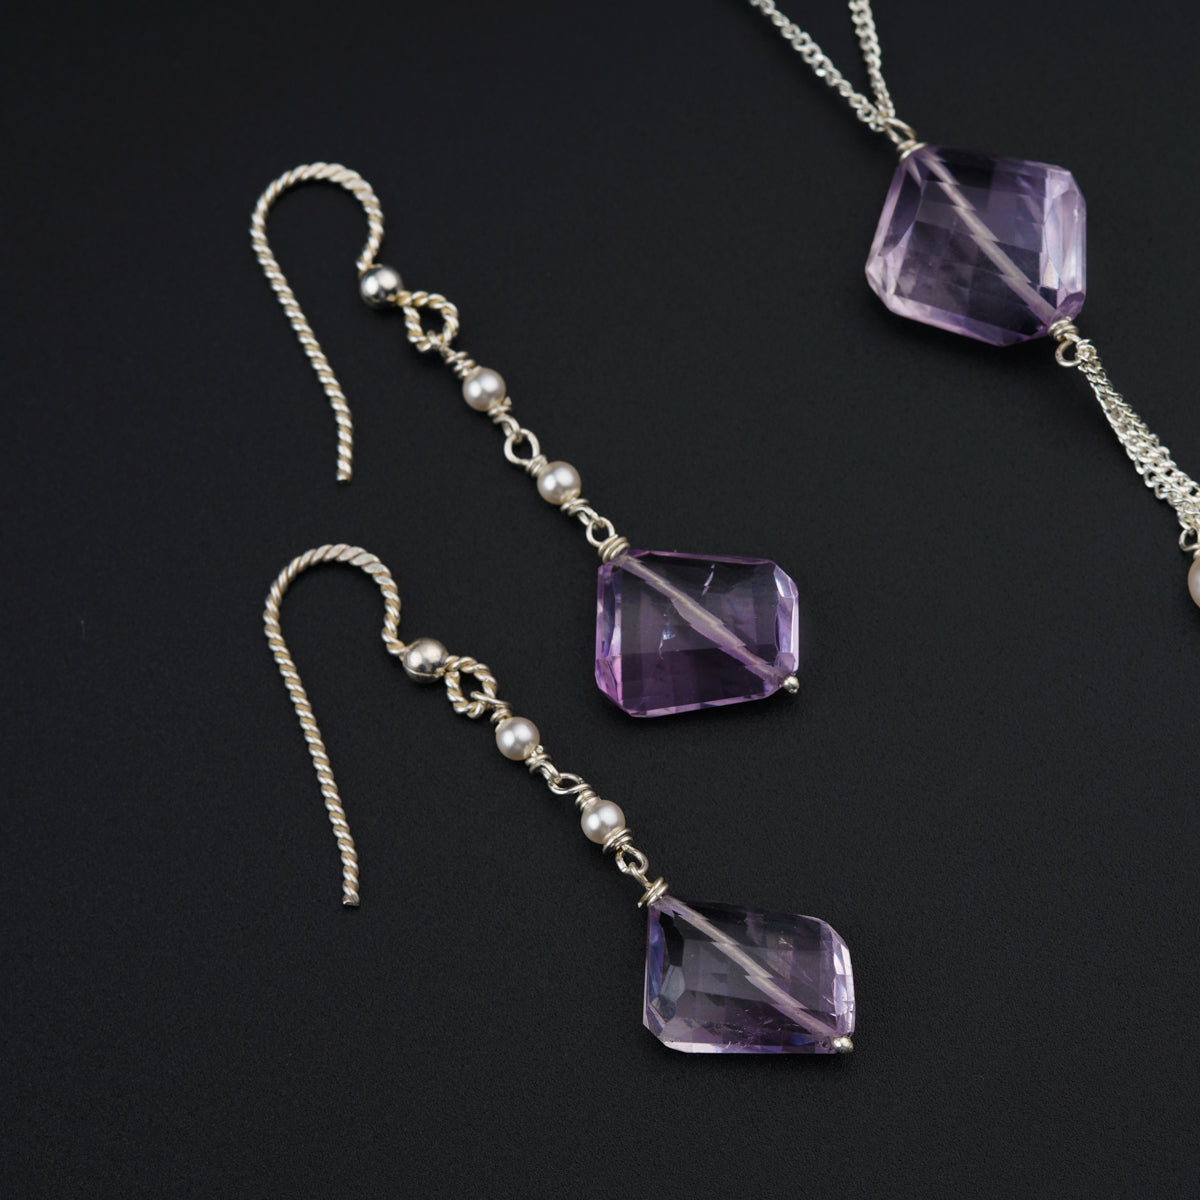 Silver Set with Amethyst stones and Pearls